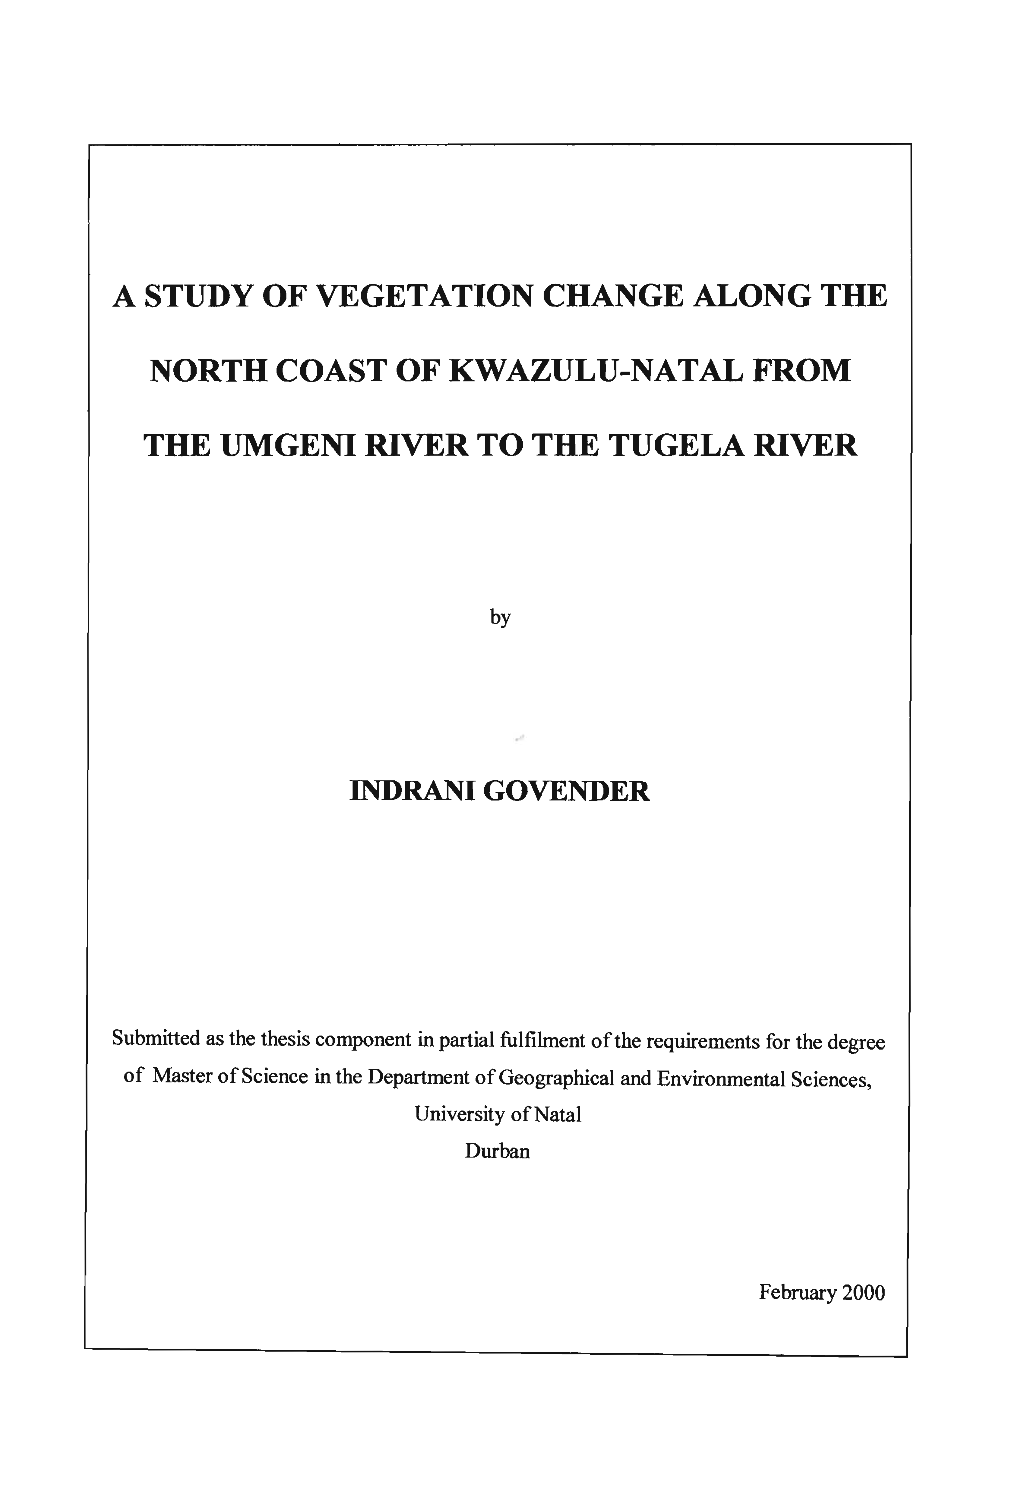 A Study of Vegetation Change Along the North Coast of Kwazulu-Natal from the Umgeni River to the Tugela River